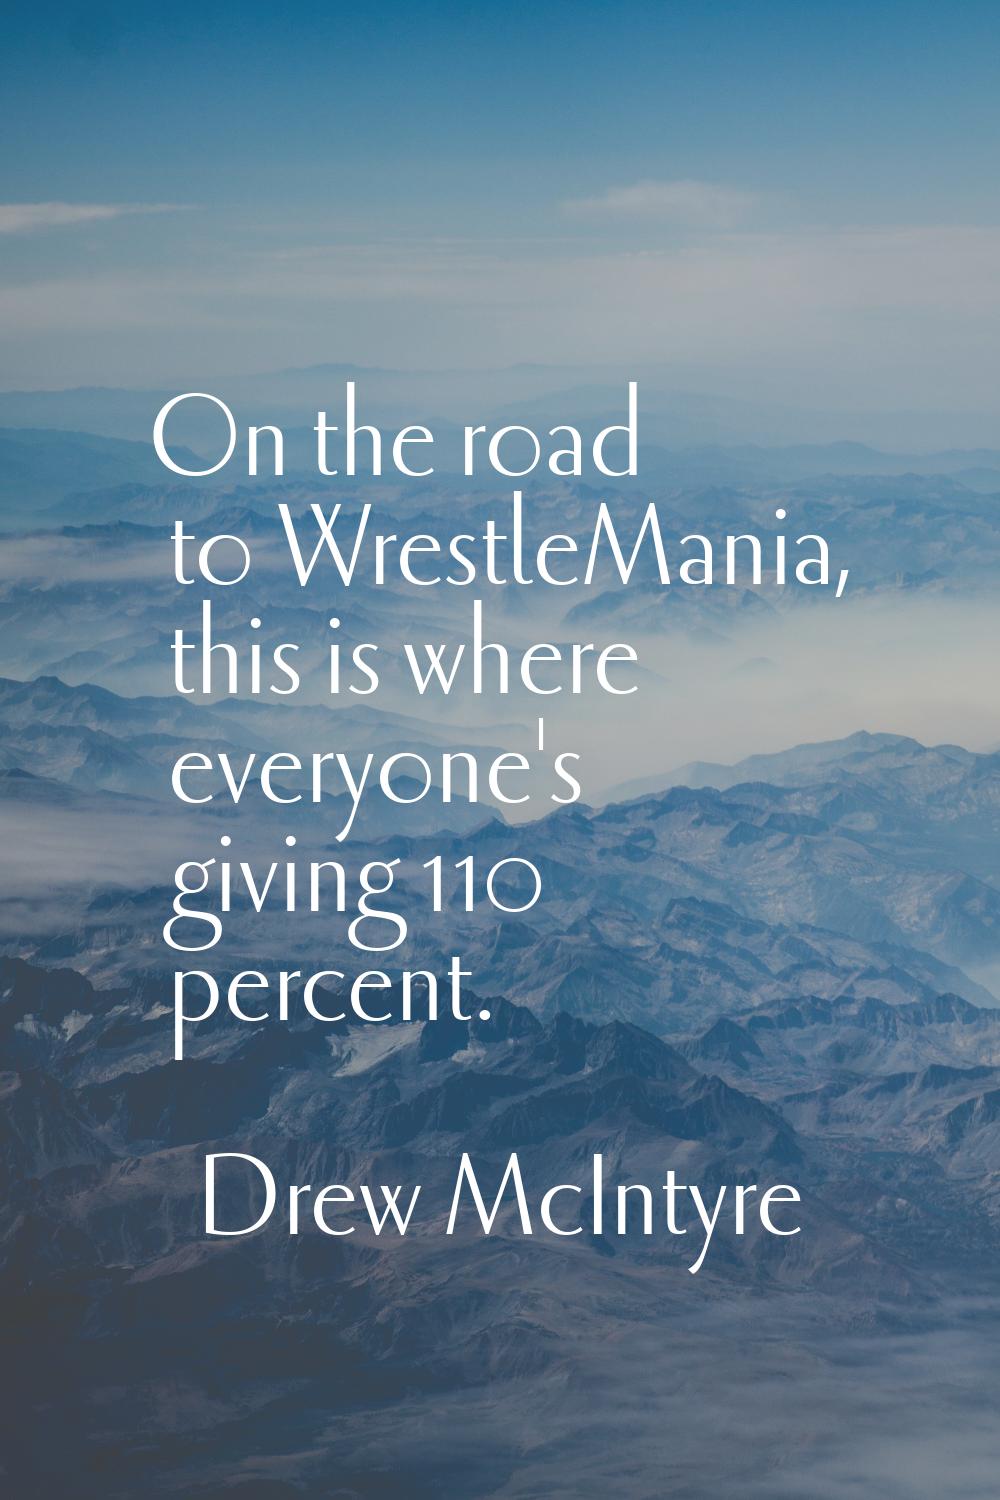 On the road to WrestleMania, this is where everyone's giving 110 percent.